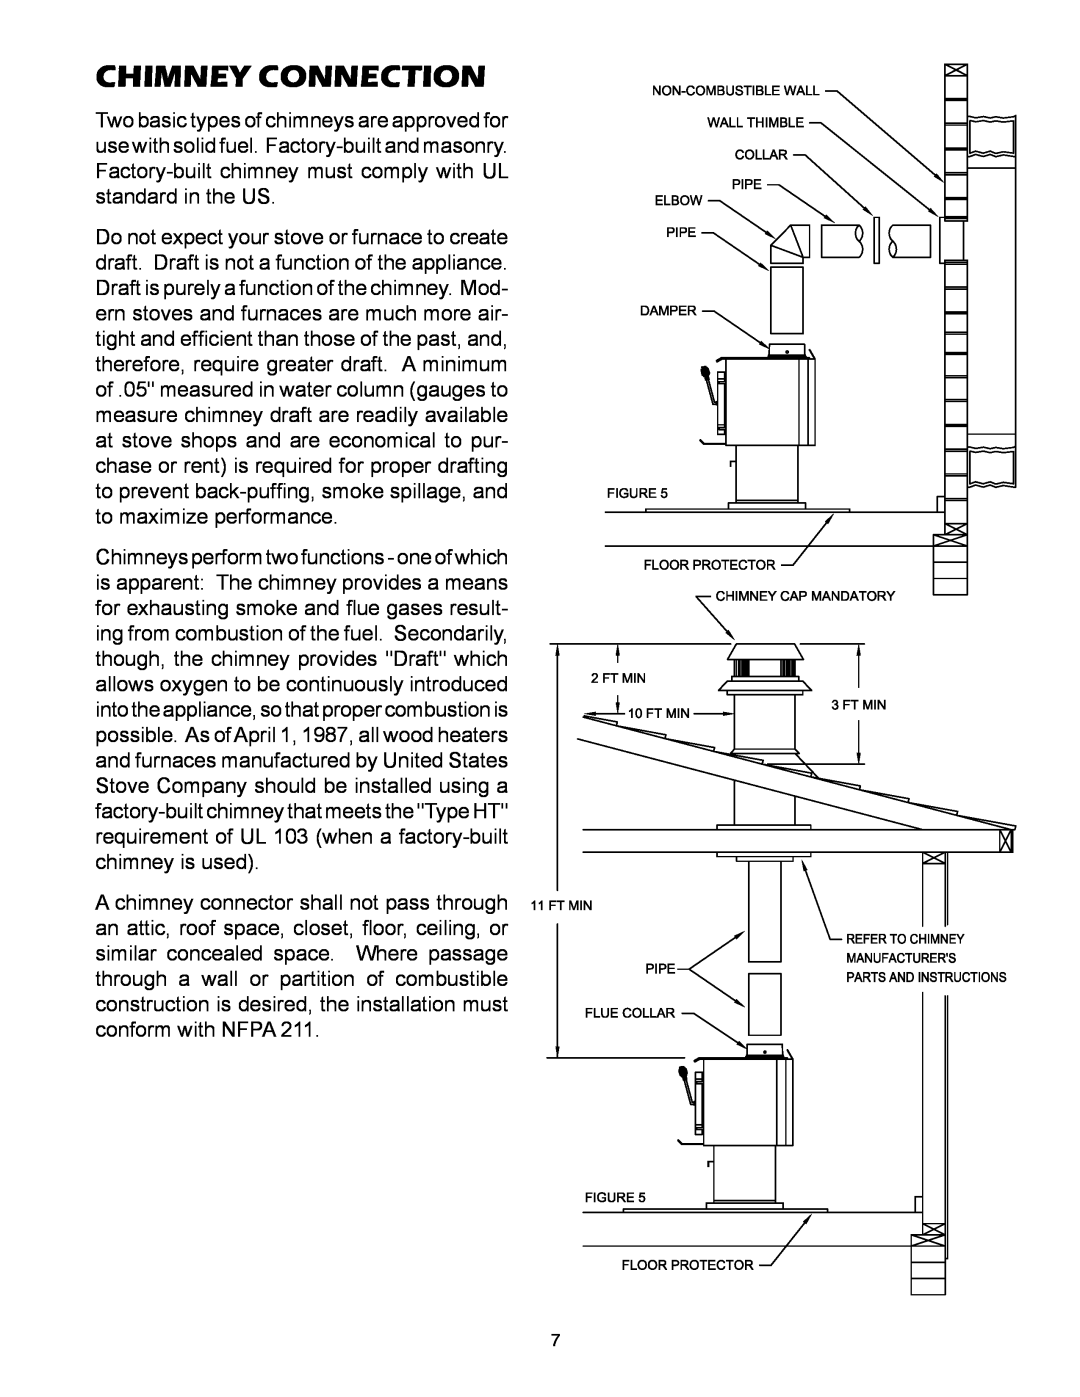 United States Stove 2007B owner manual chimney connection 